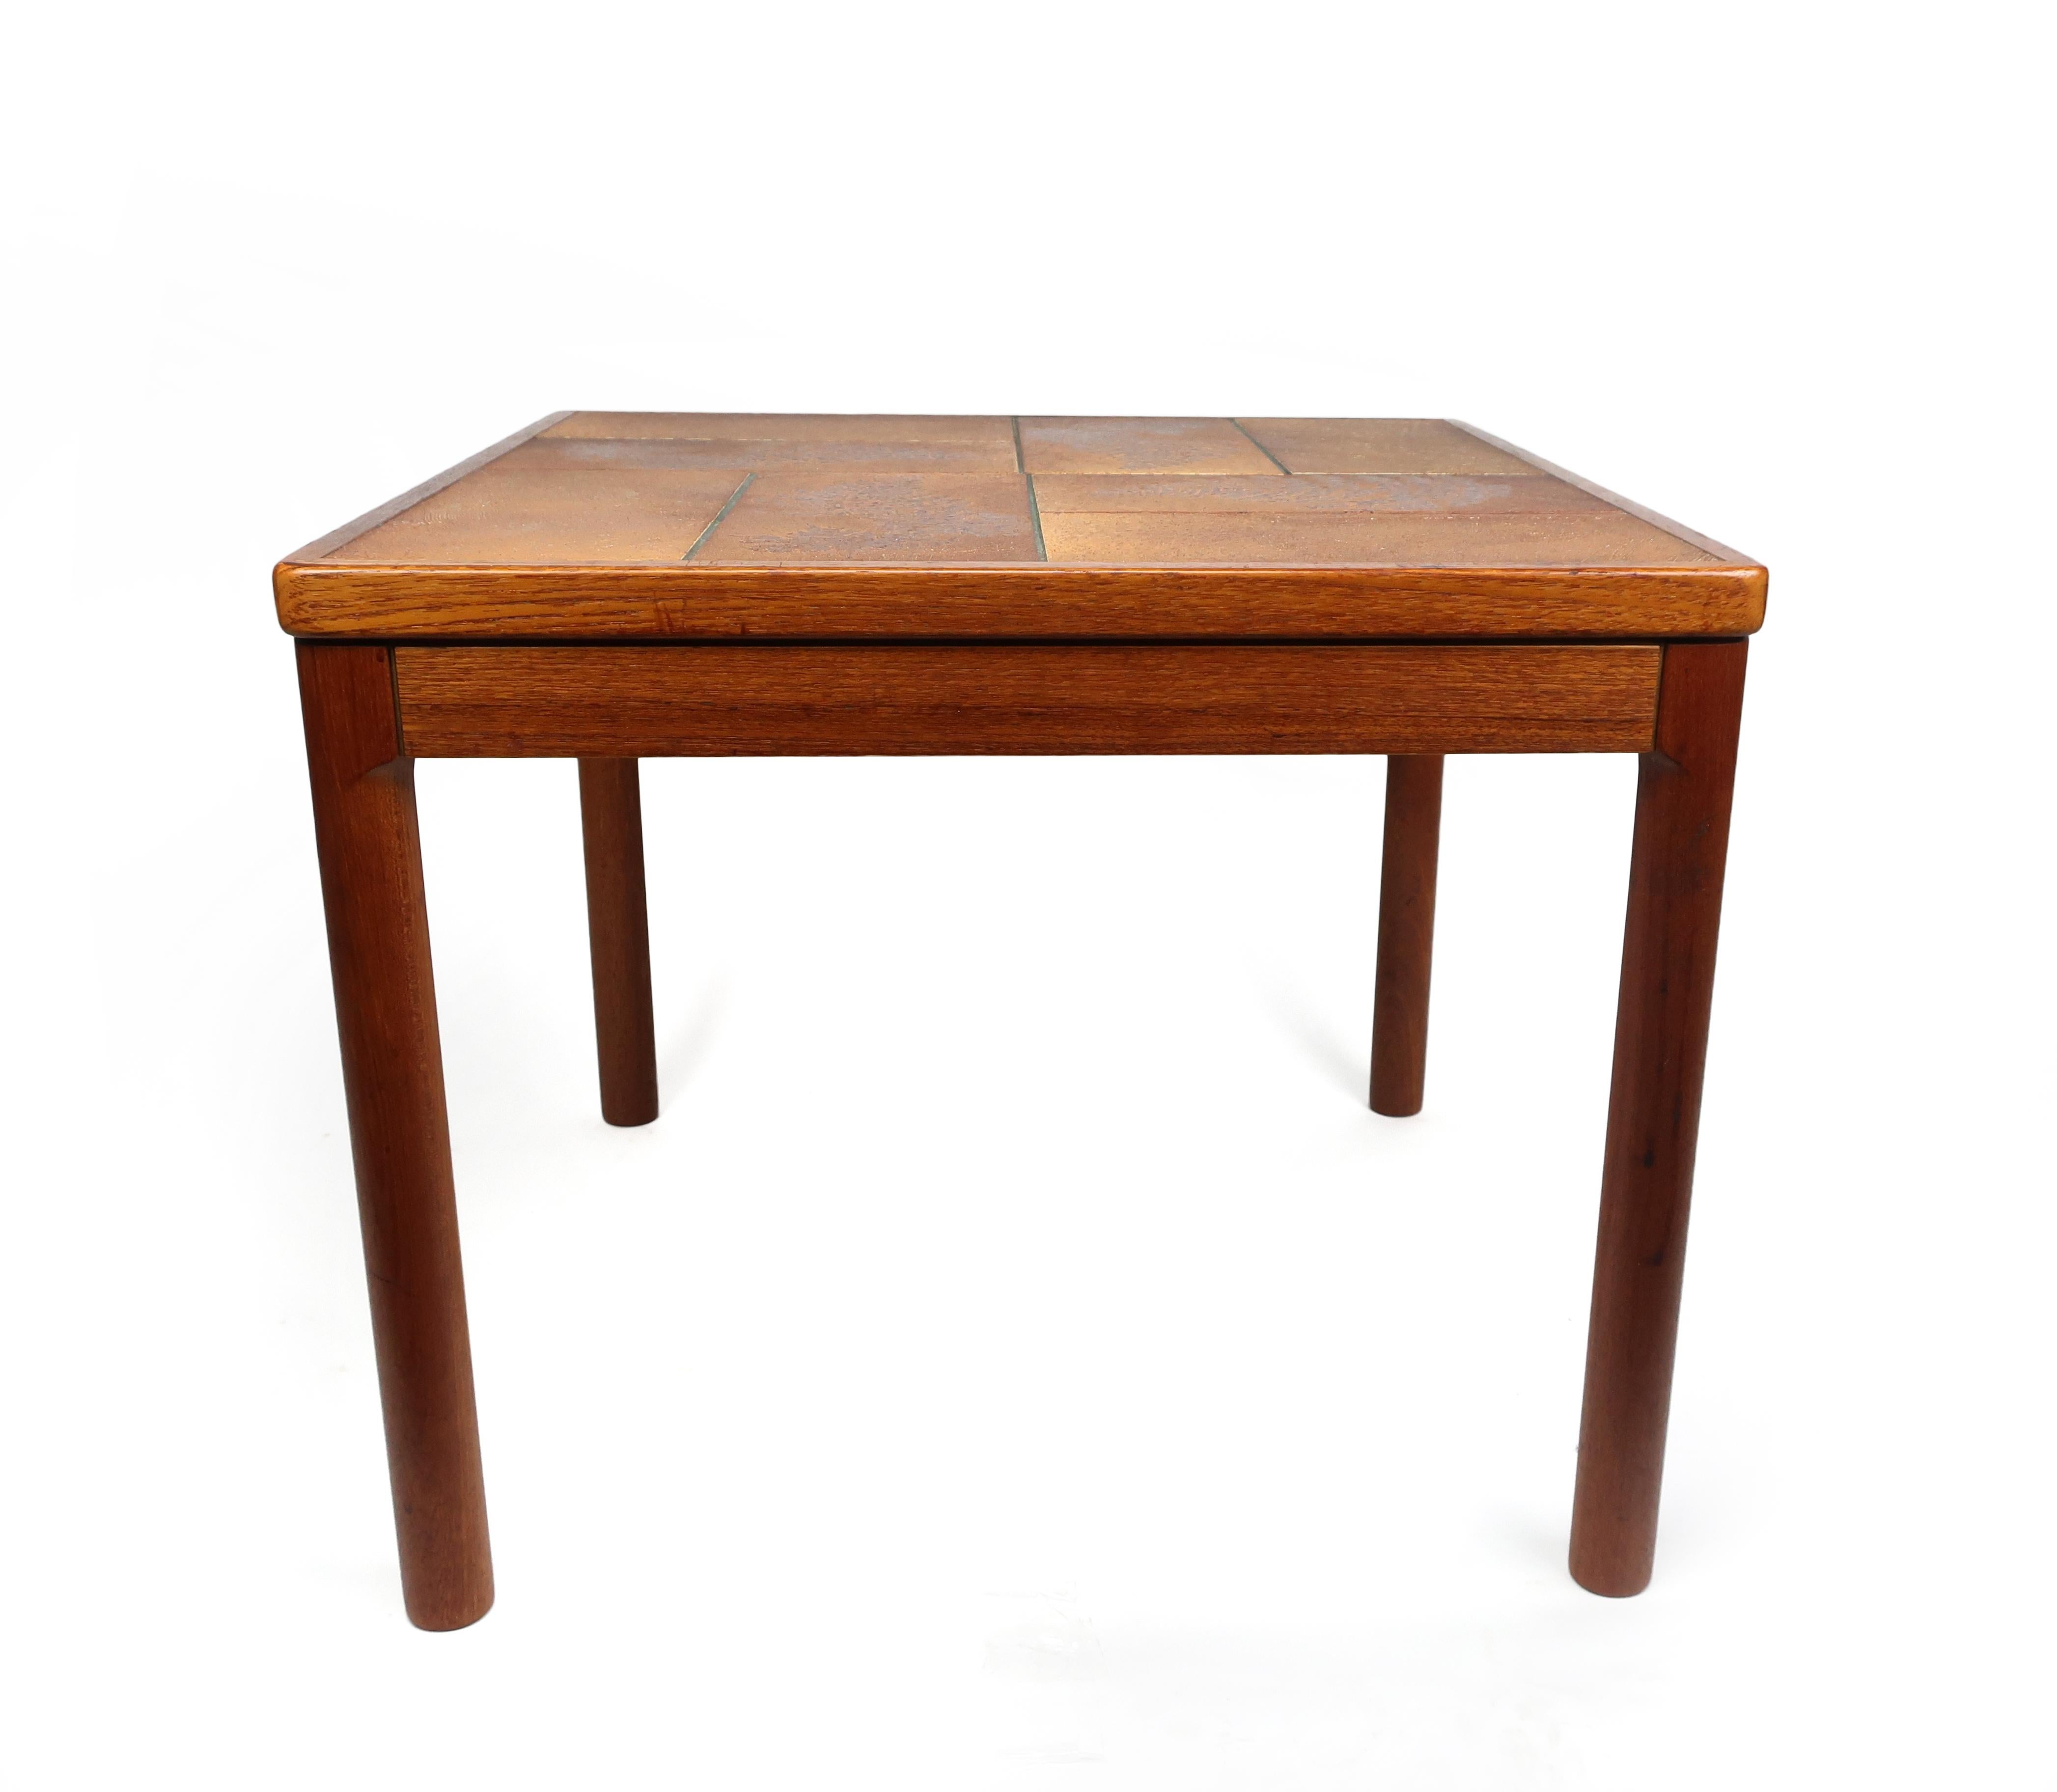 A vintage Danish modern teak and tile side table with lovely round turned legs by Trioh. The tabletop's tile has an orange and brown glaze, a pattern of fern leaves, and etched decoration. Eight tiles in total.

In excellent vintage condition with